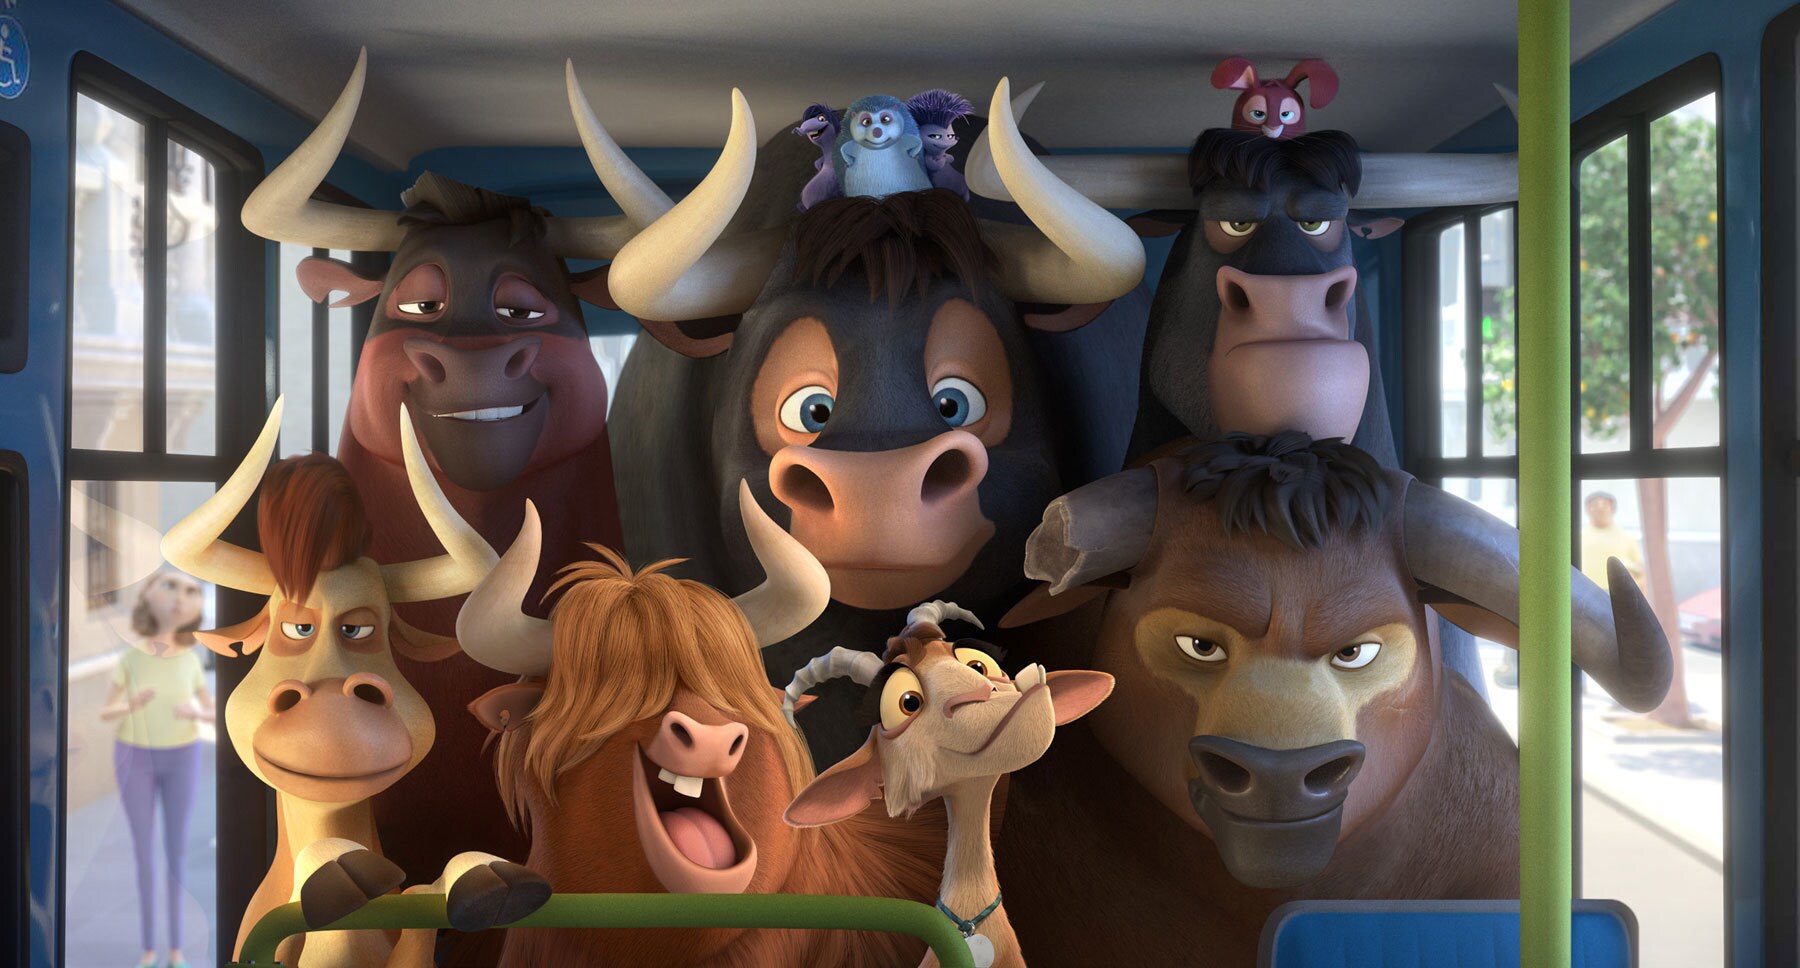 Actors Anthony Anderson, Bobby Cannavale, Gabriel Iglesias, Kate McKinnon, Tim Nordquist, David Tennant, John Cena, Peyton Manning, Cindy Slattery, Gina Rodriguez, and Daveed Diggs as their animated characters in the movie "Ferdinand"